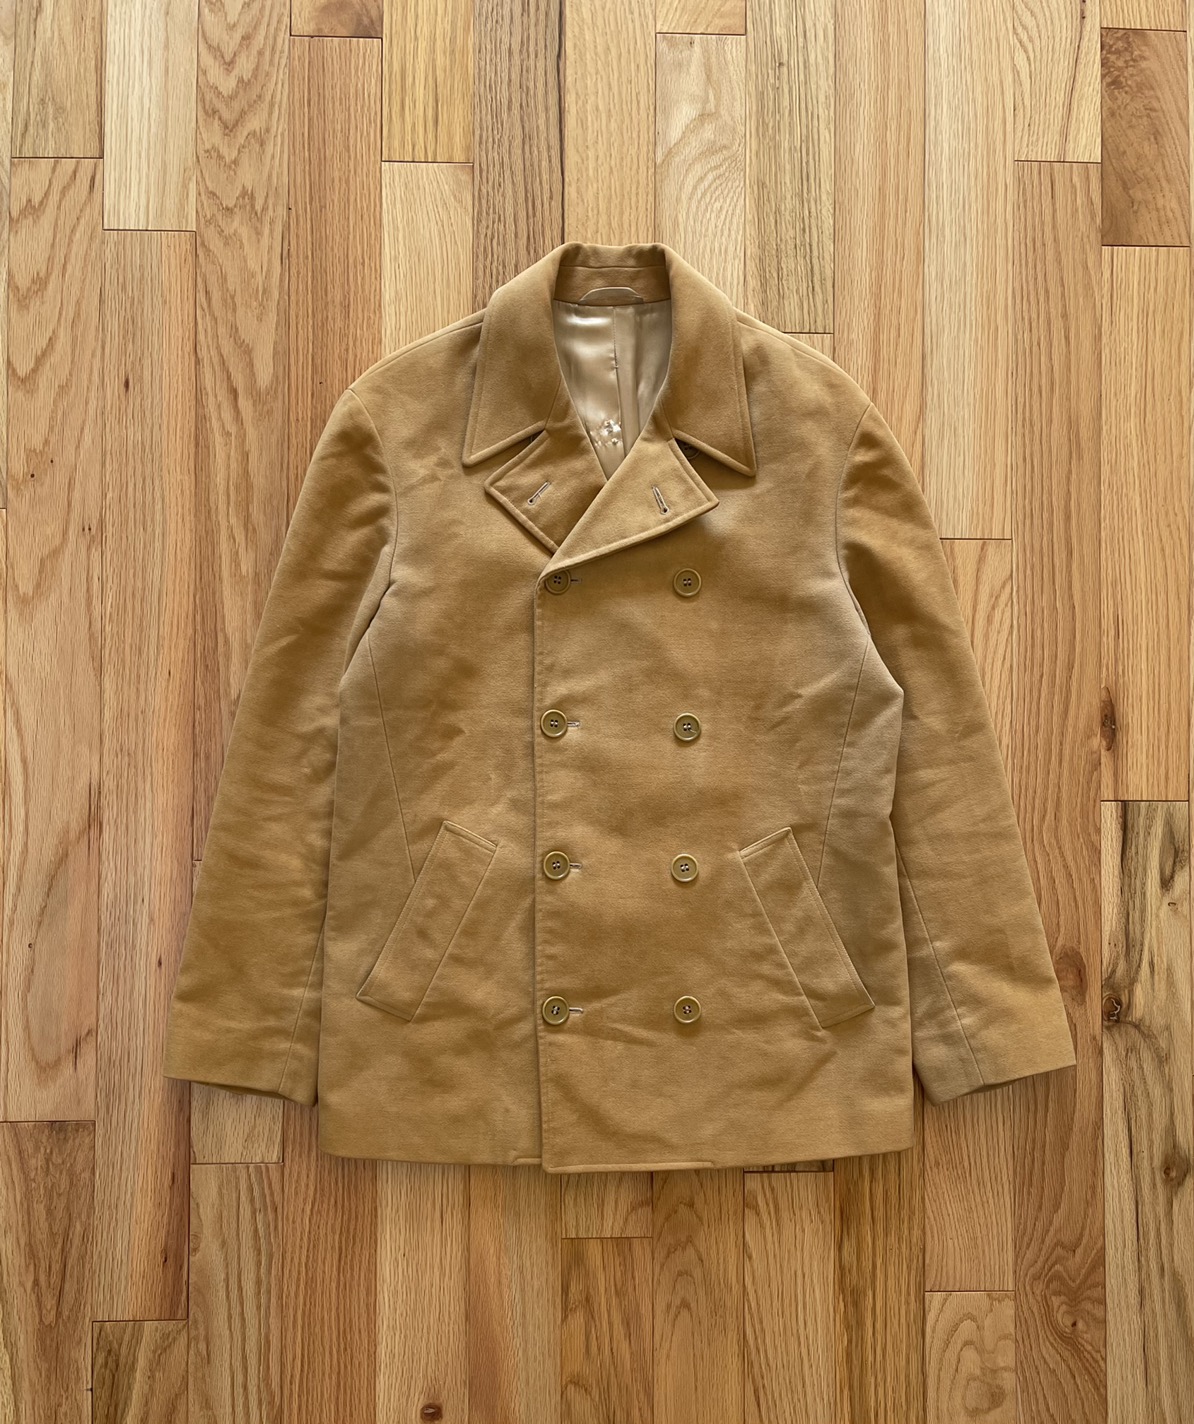 Early 2000s Helmut Lang Suede Double Breasted Peacoat - 1